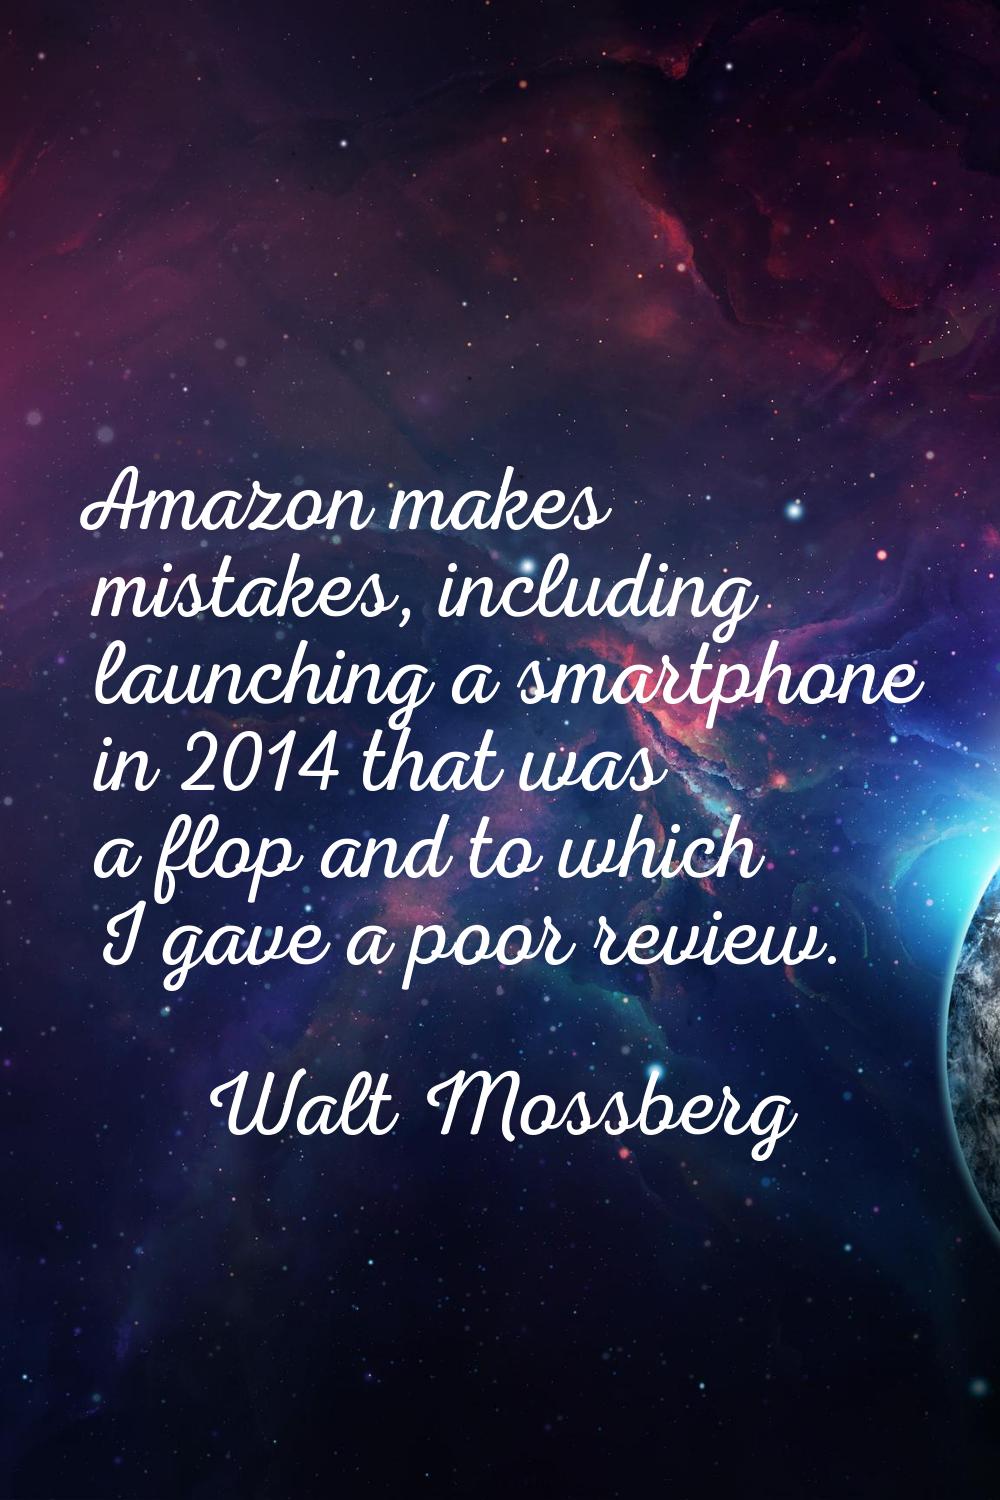 Amazon makes mistakes, including launching a smartphone in 2014 that was a flop and to which I gave